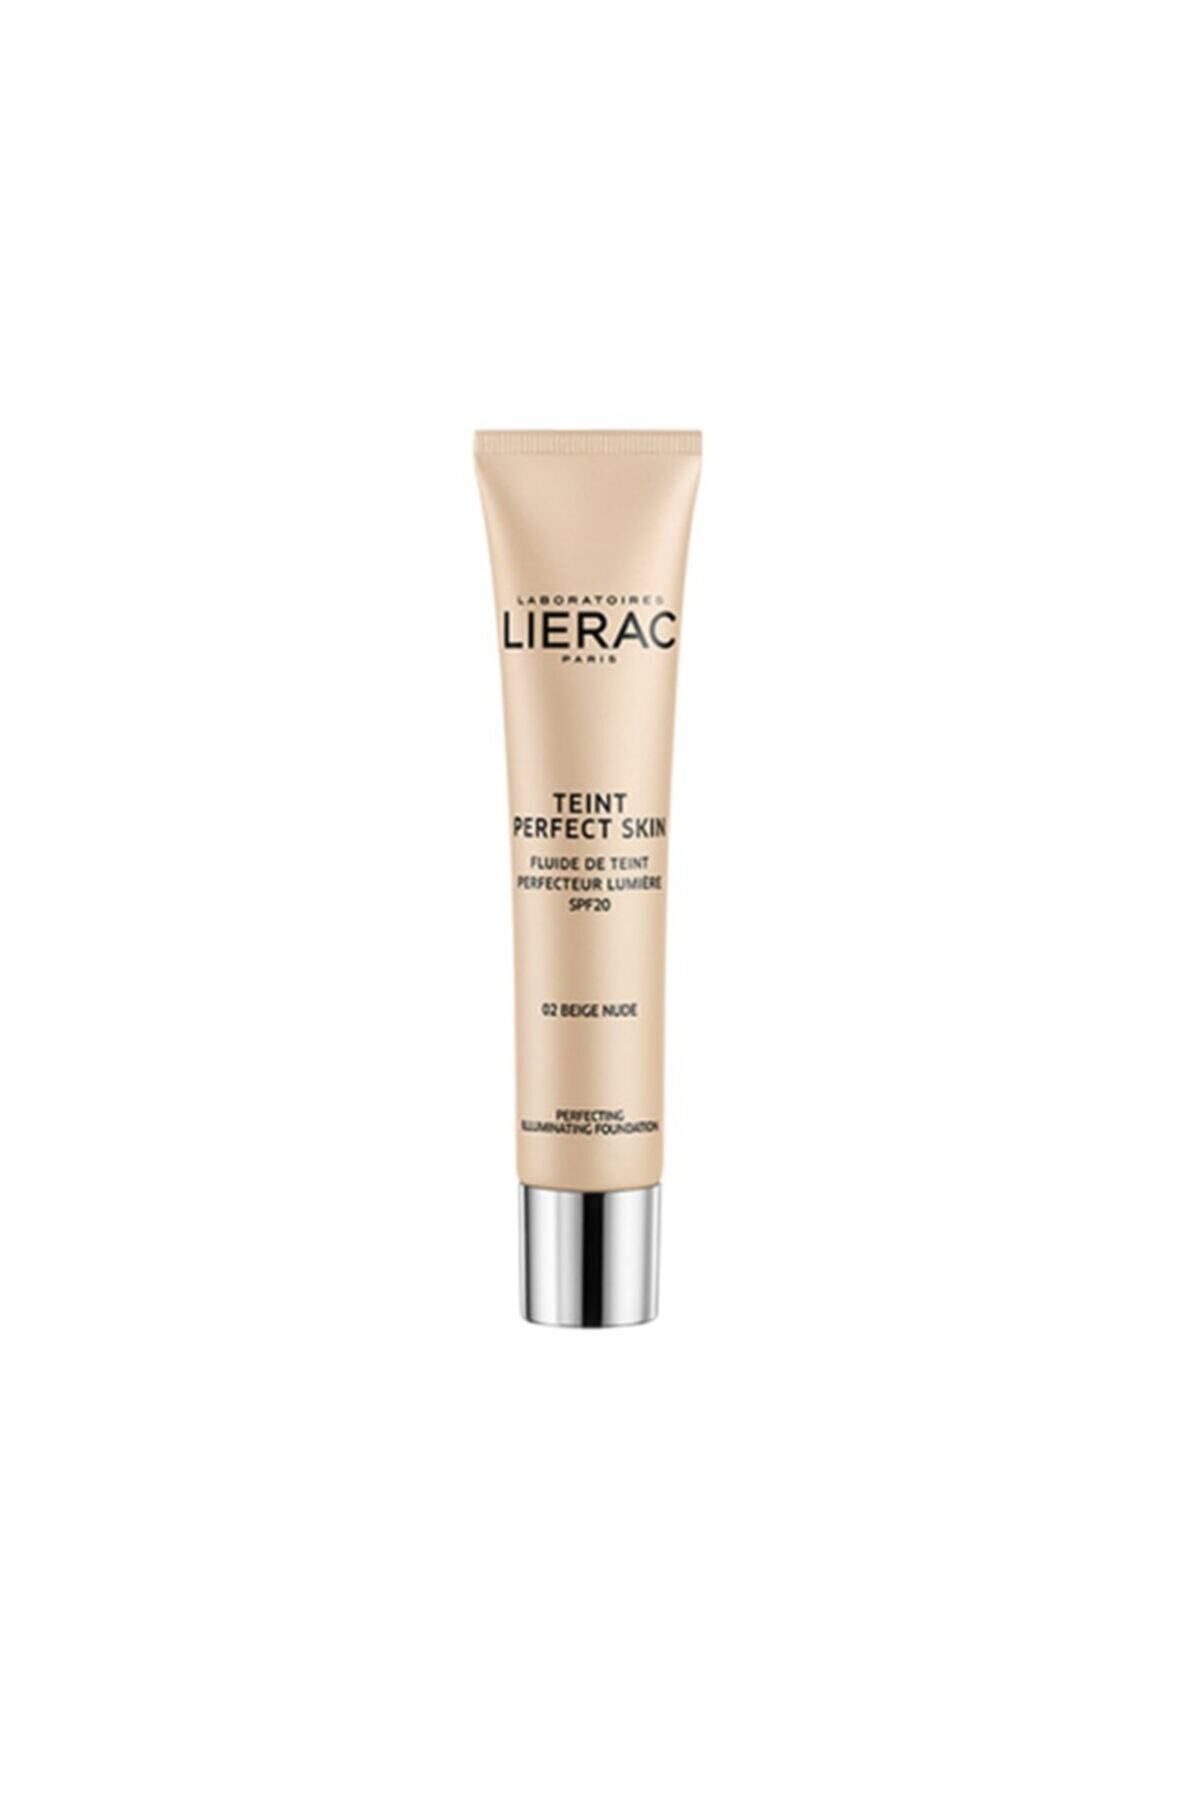 Lierac Nude Effect on the Skin 30ml Beige Nude, Giving Skin a Shiny Appearance Foundation